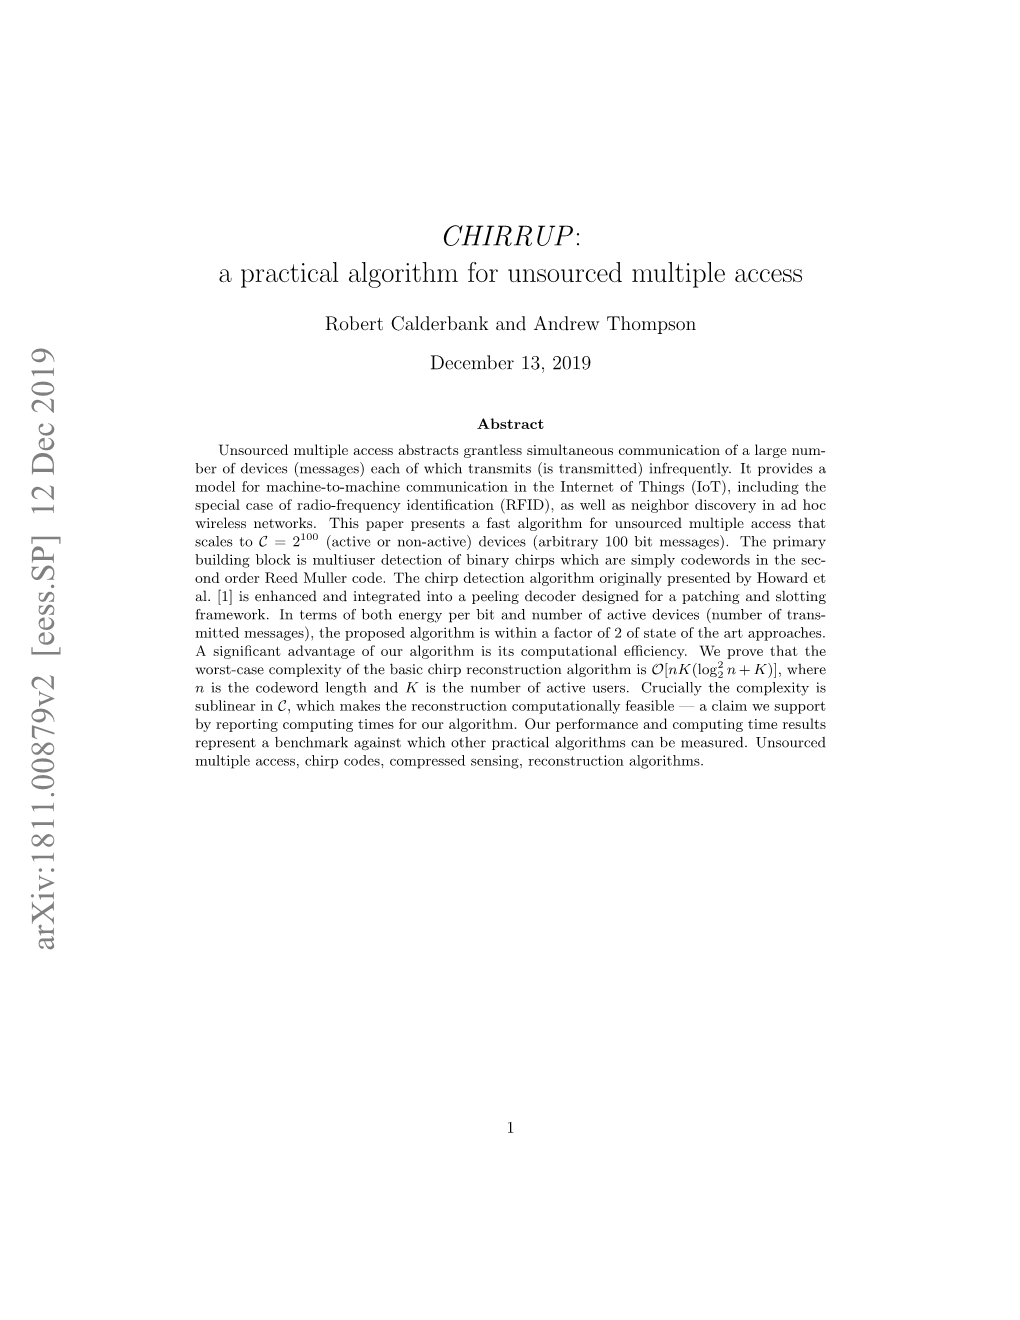 CHIRRUP: a Practical Algorithm for Unsourced Multiple Access